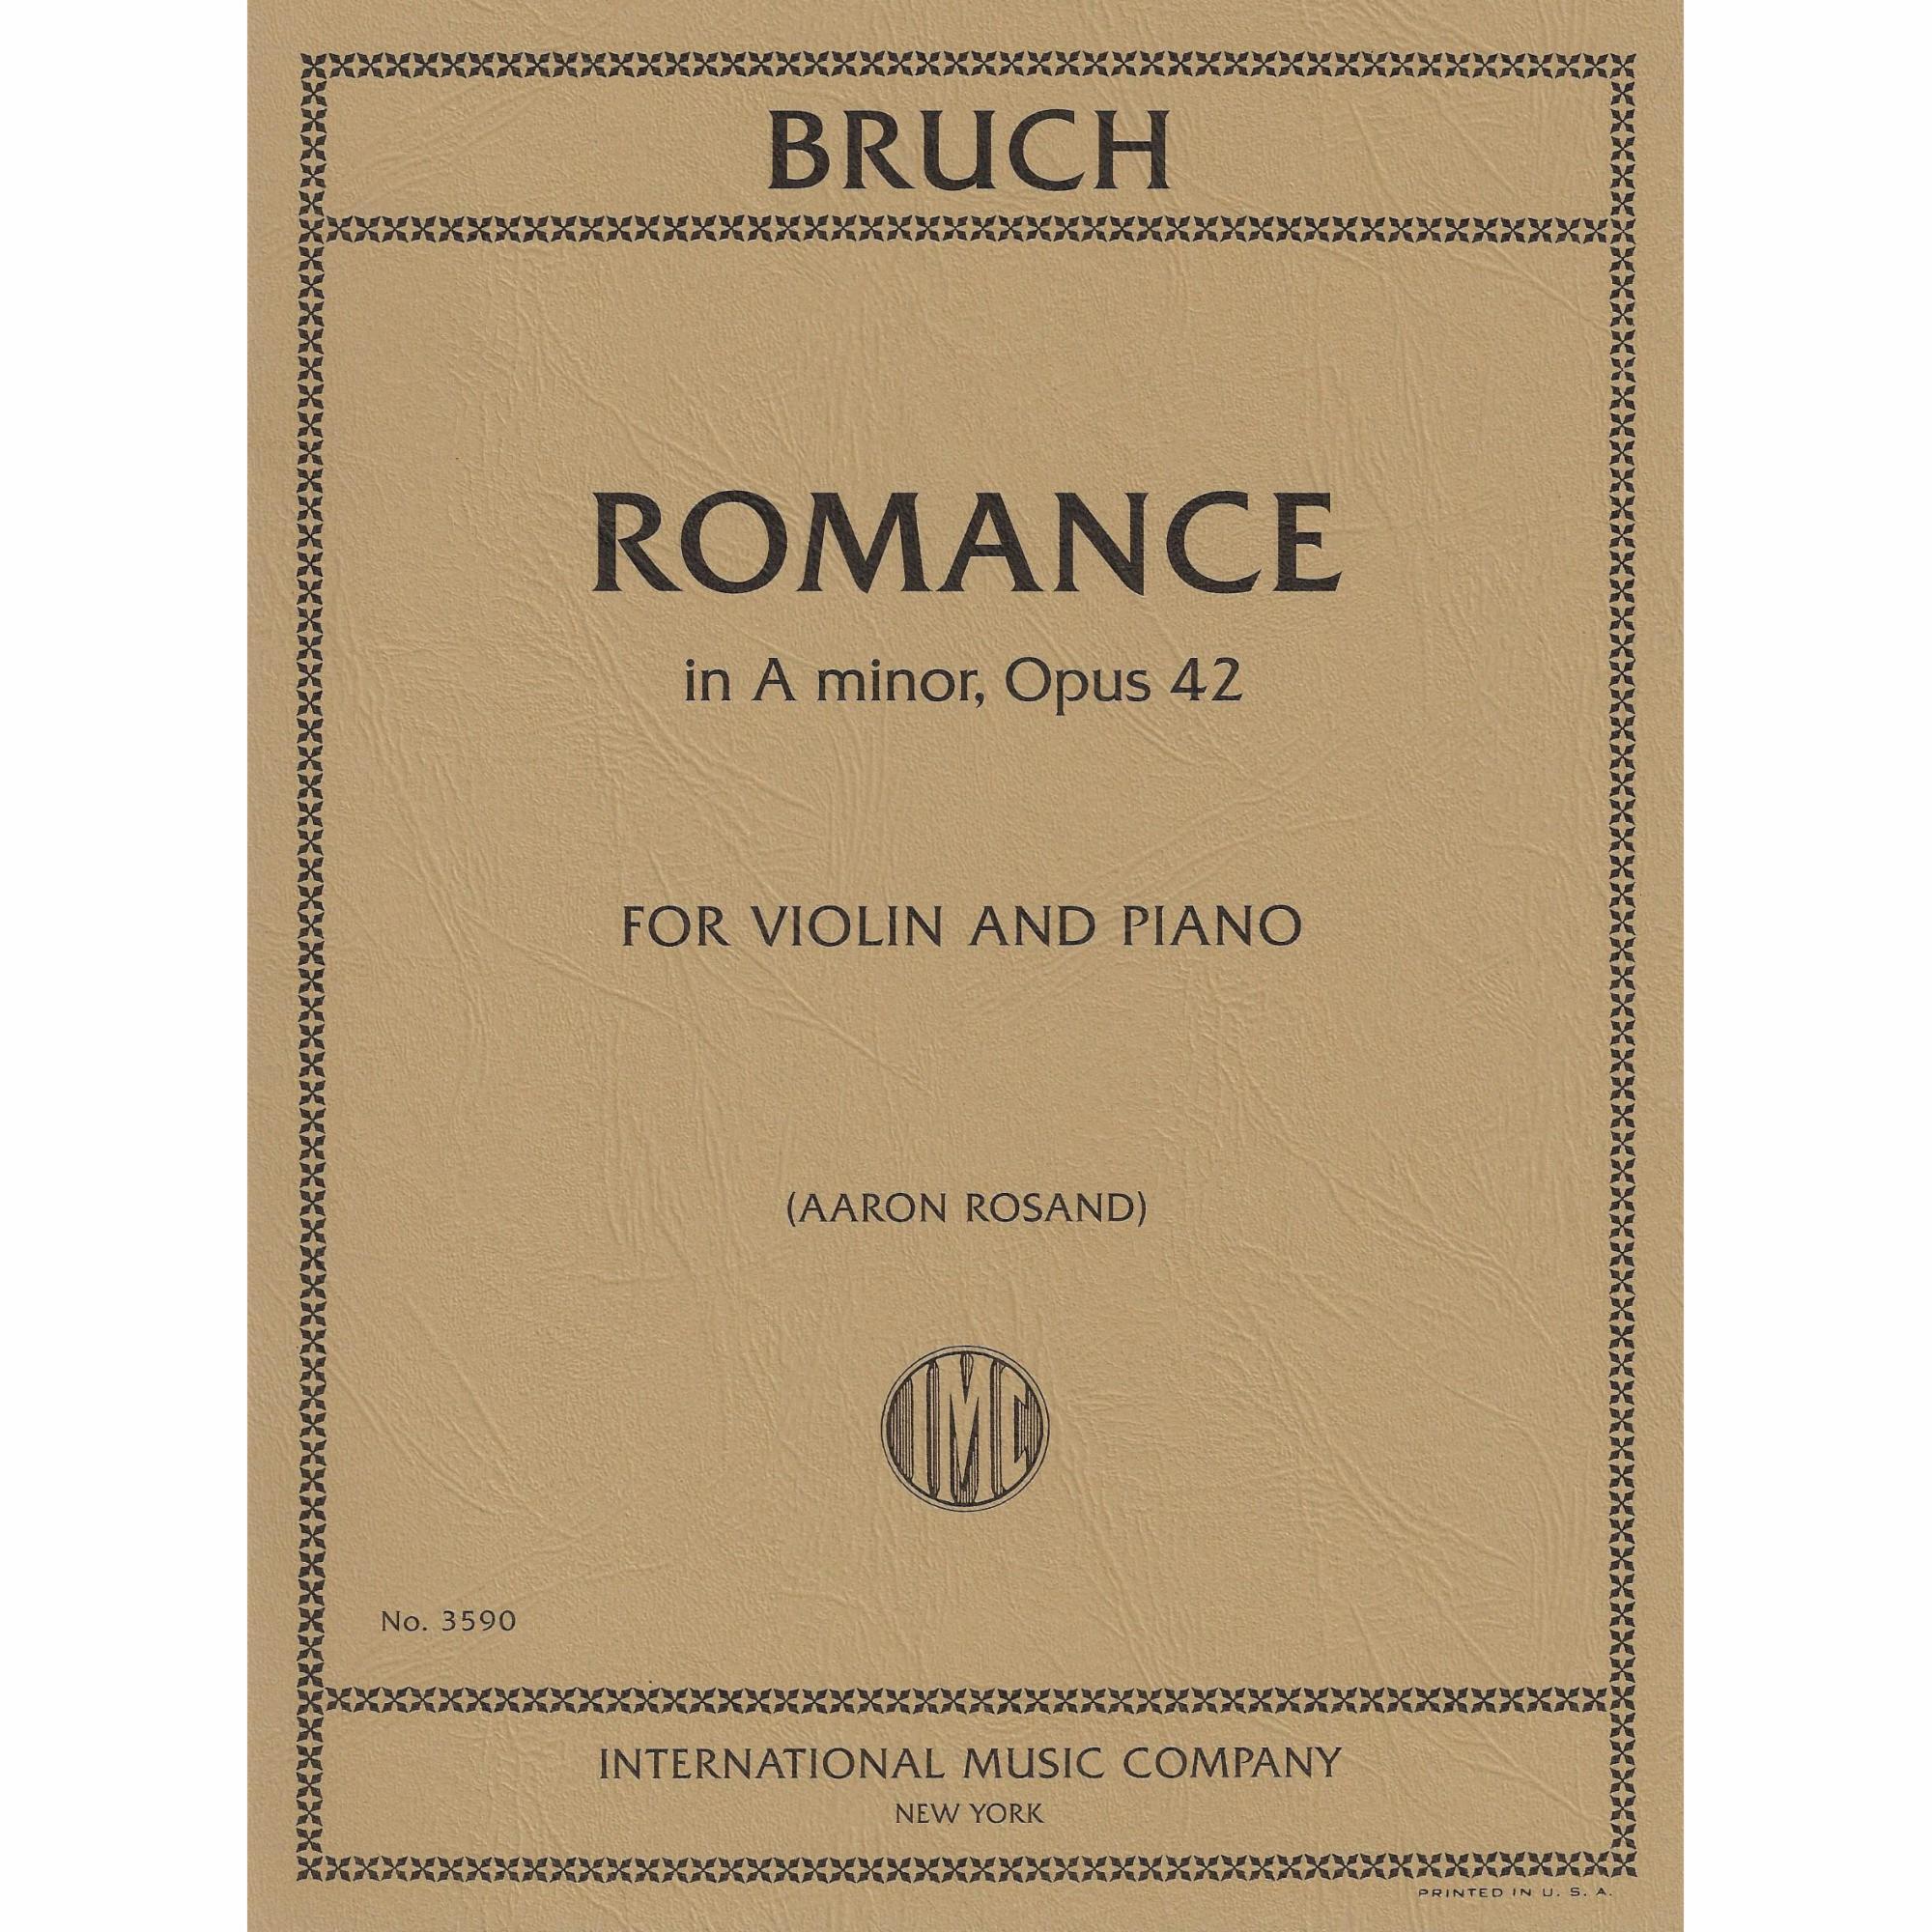 Bruch -- Romance in A Minor, Op. 42 for Violin and Piano